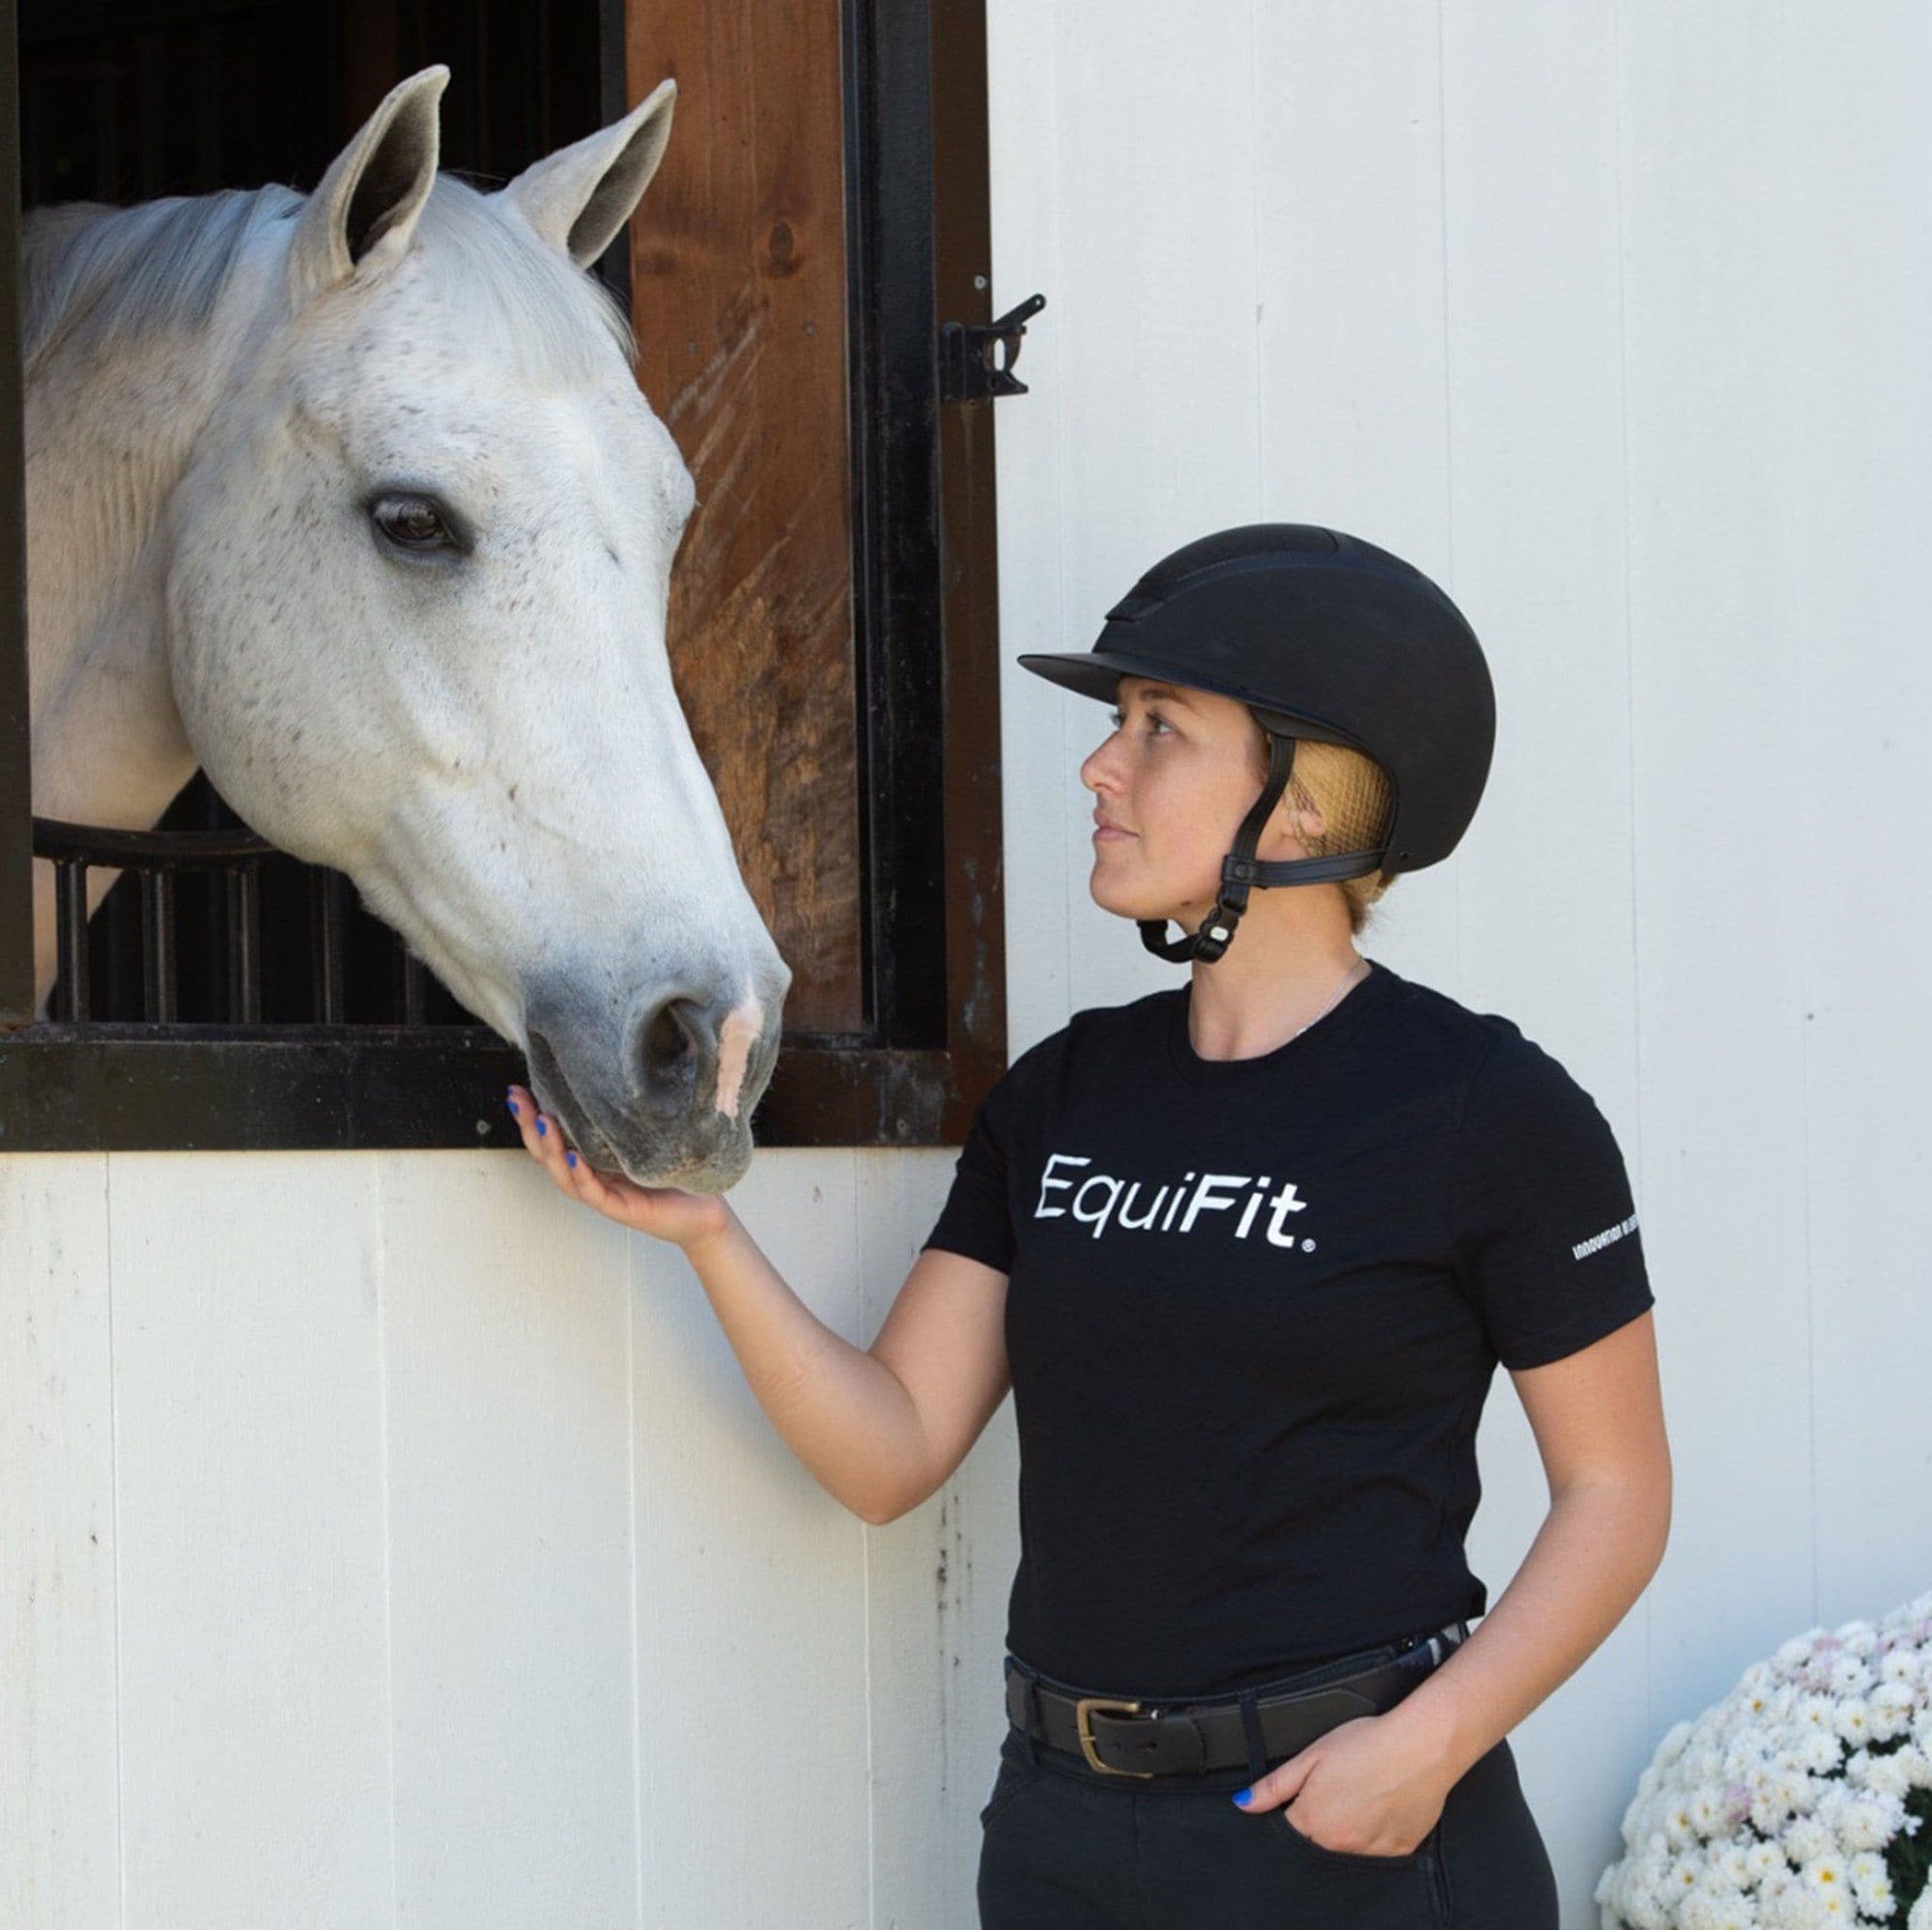 EquiFit T-Shirt featuring the EquiFit logo across the chest & We Have Higher Standards on the sleeve.